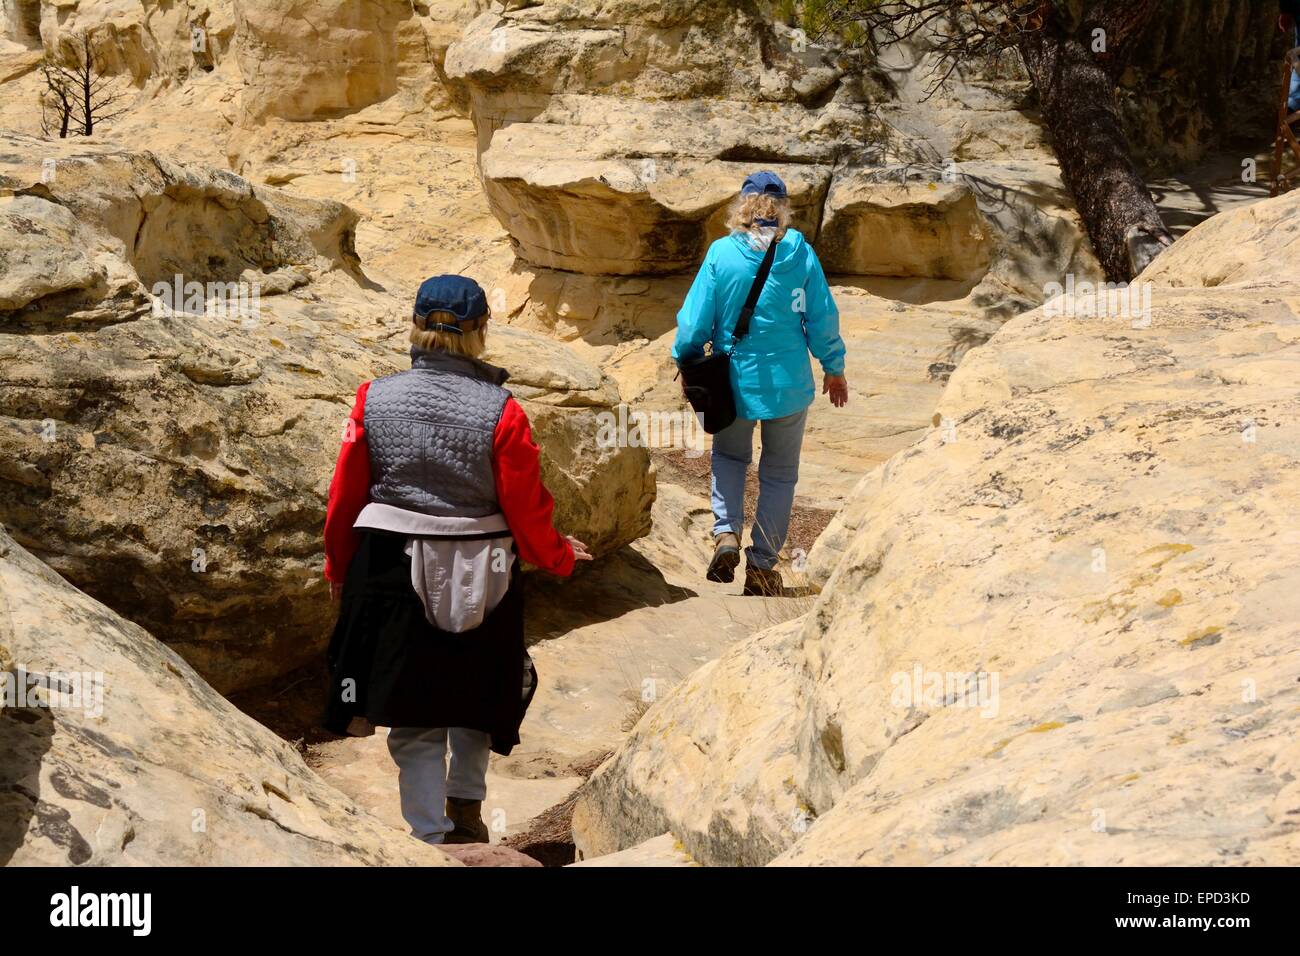 Two Senior Citizens negotiating a trail carved into the sandstone at El Morro National Monument New Mexico - USA Stock Photo